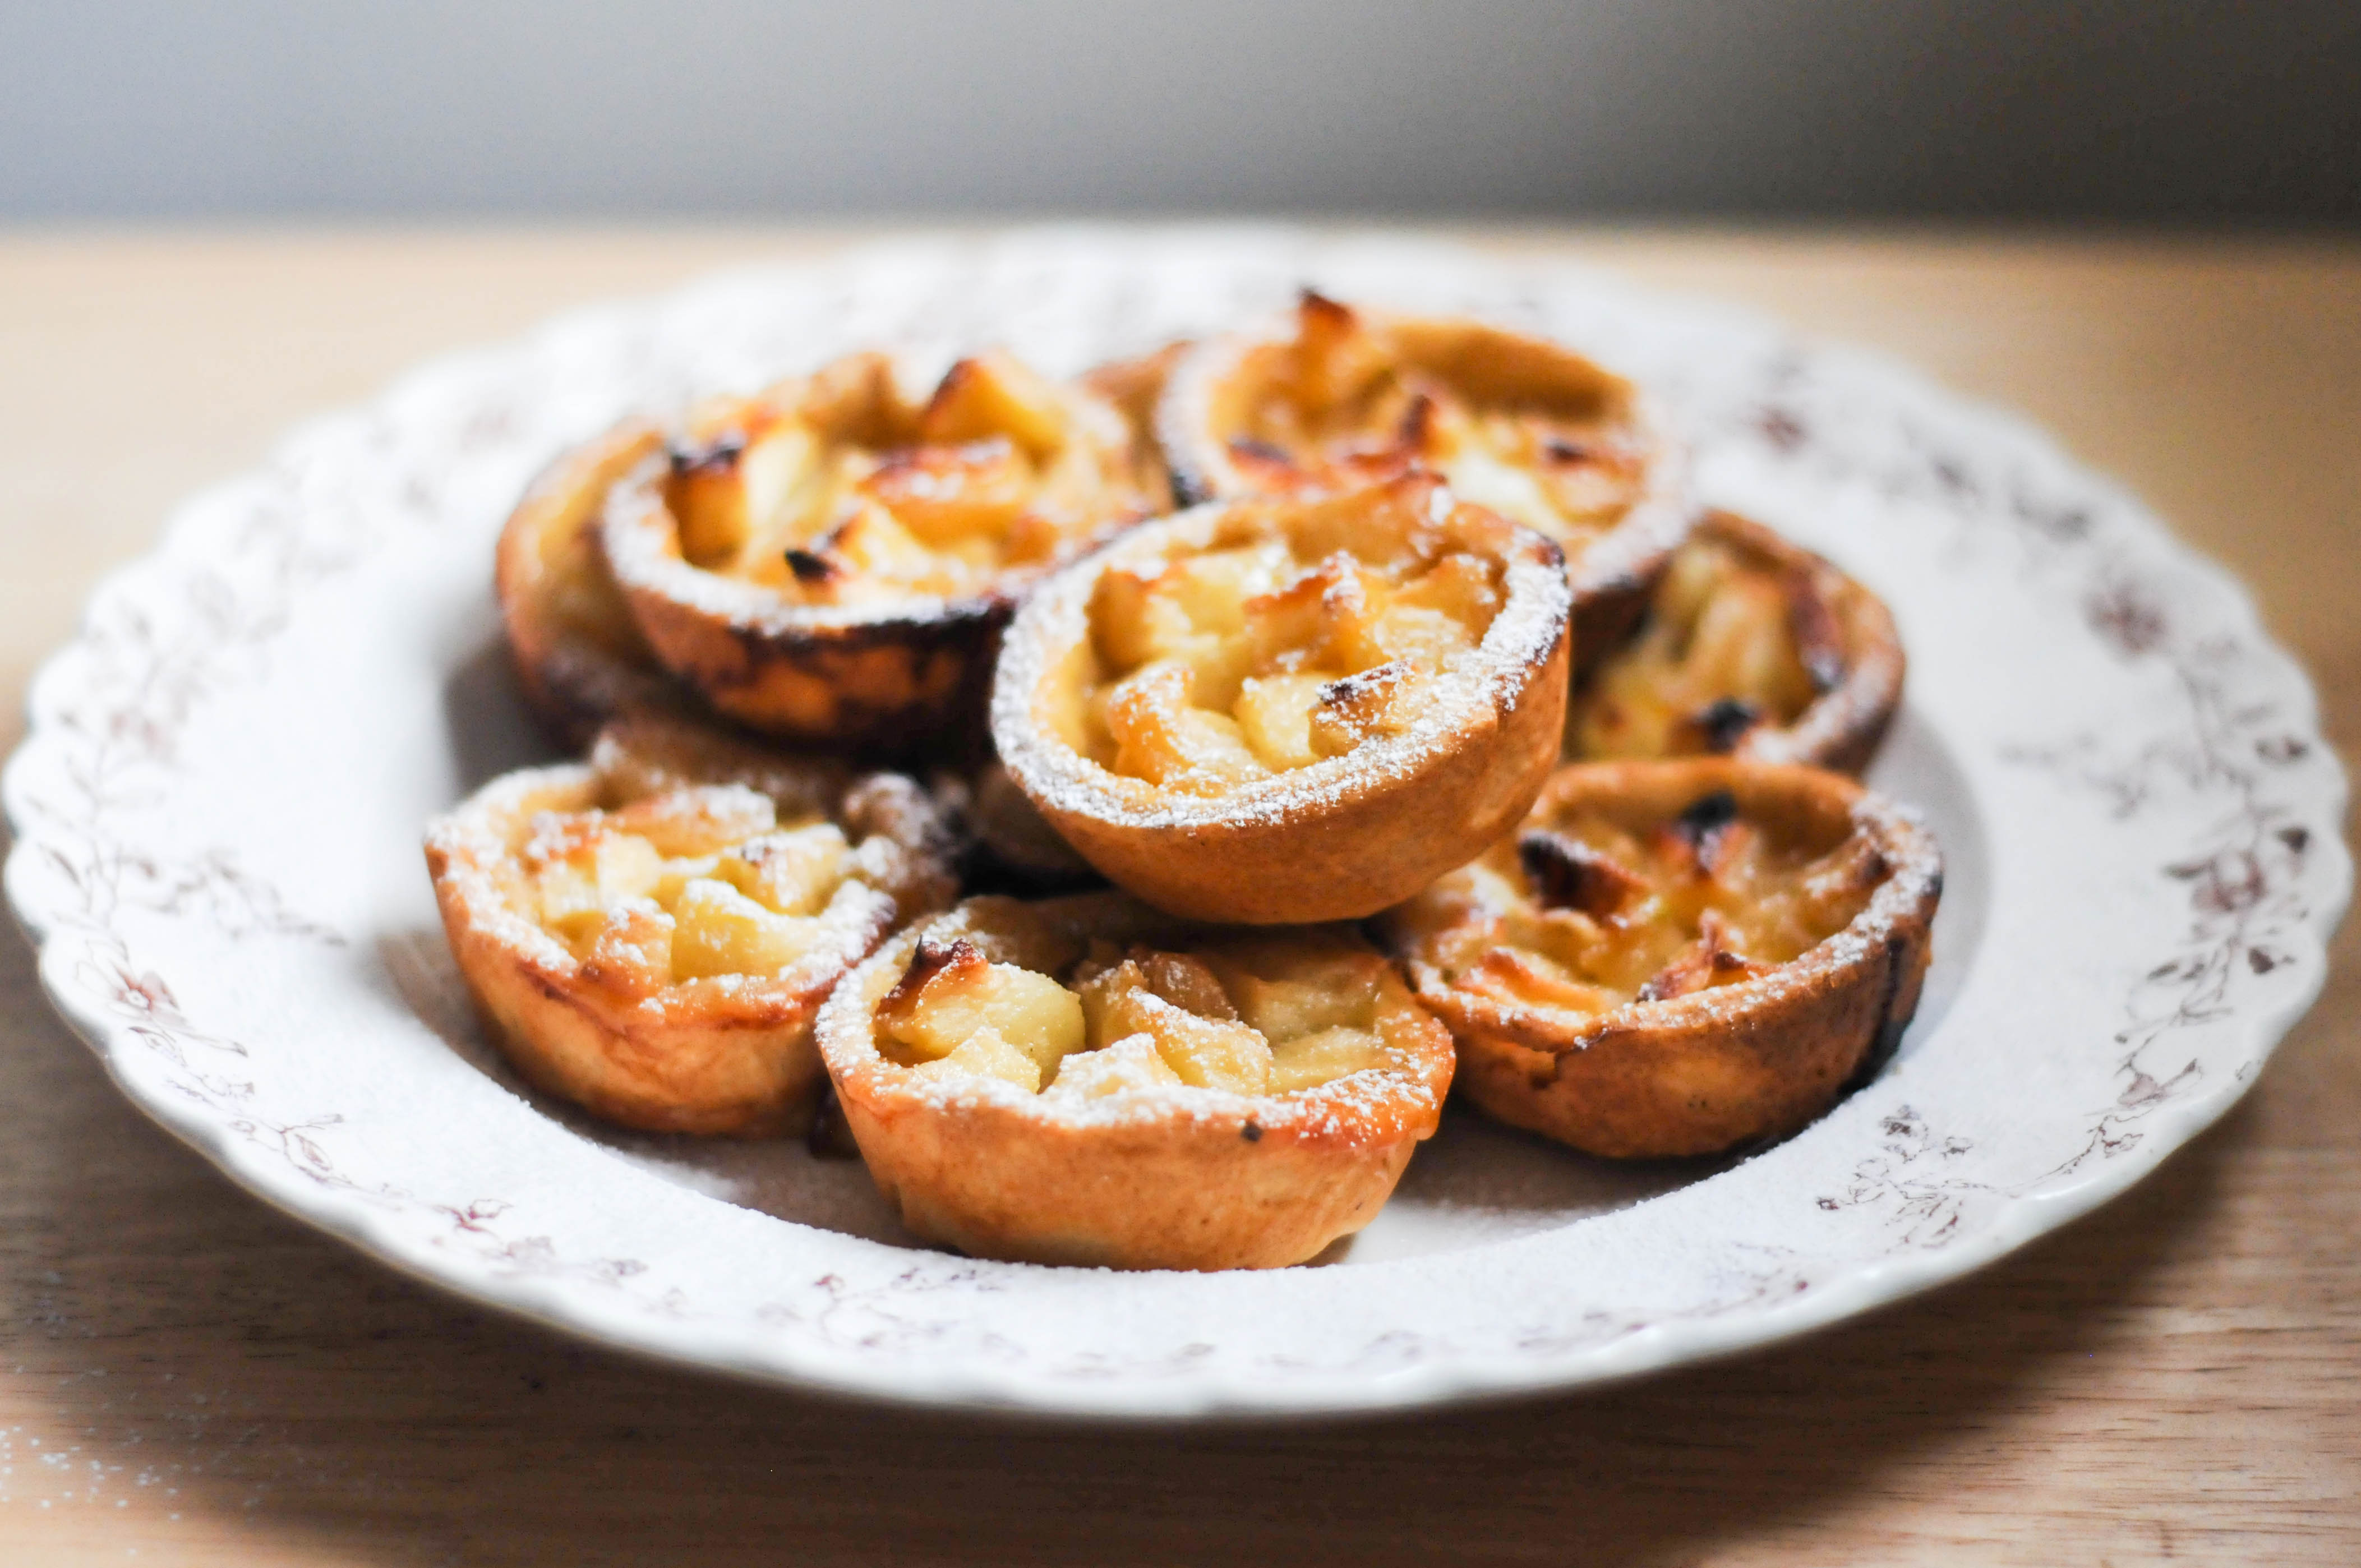 Toffee Apple Tarts, 3 years of blogging and a refresh!